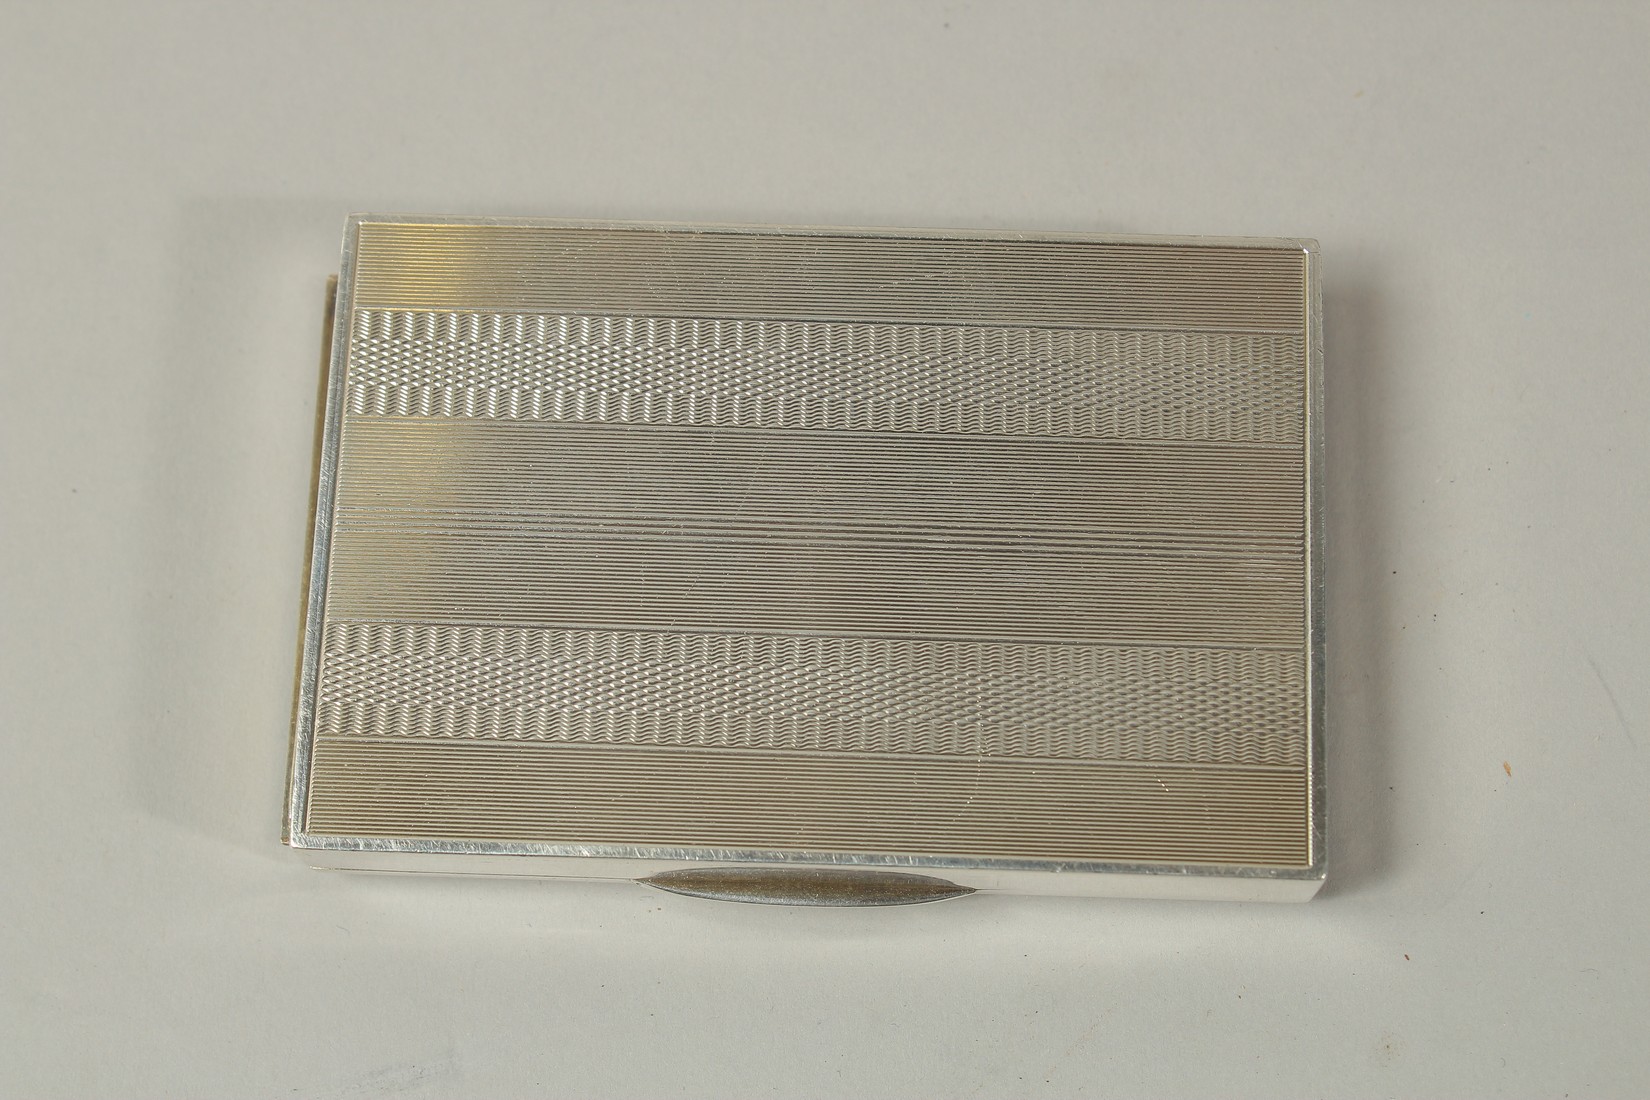 A CONTINENTAL SILVER CIGARETTE CASE with engine turned decoration, the interior of the lid revealing - Image 3 of 3